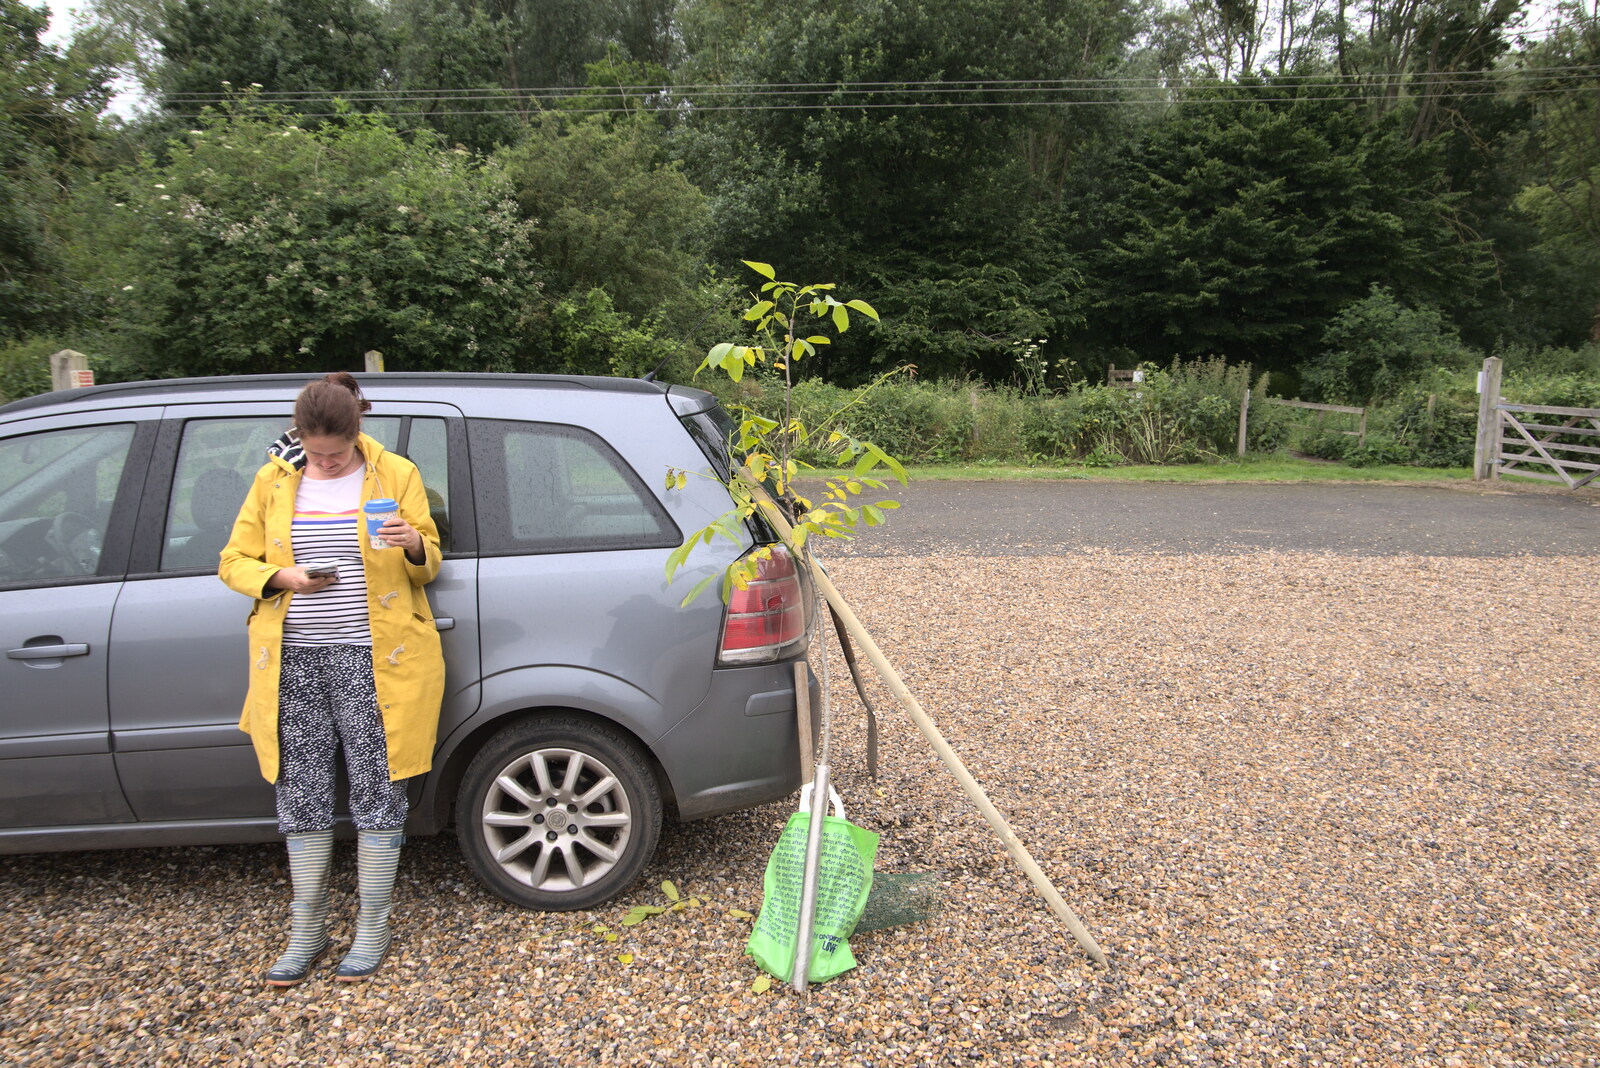 Isobel checks her phone at the skate park car park from Planting a Tree, Town Moors, Eye, Suffolk - 10th July 2021